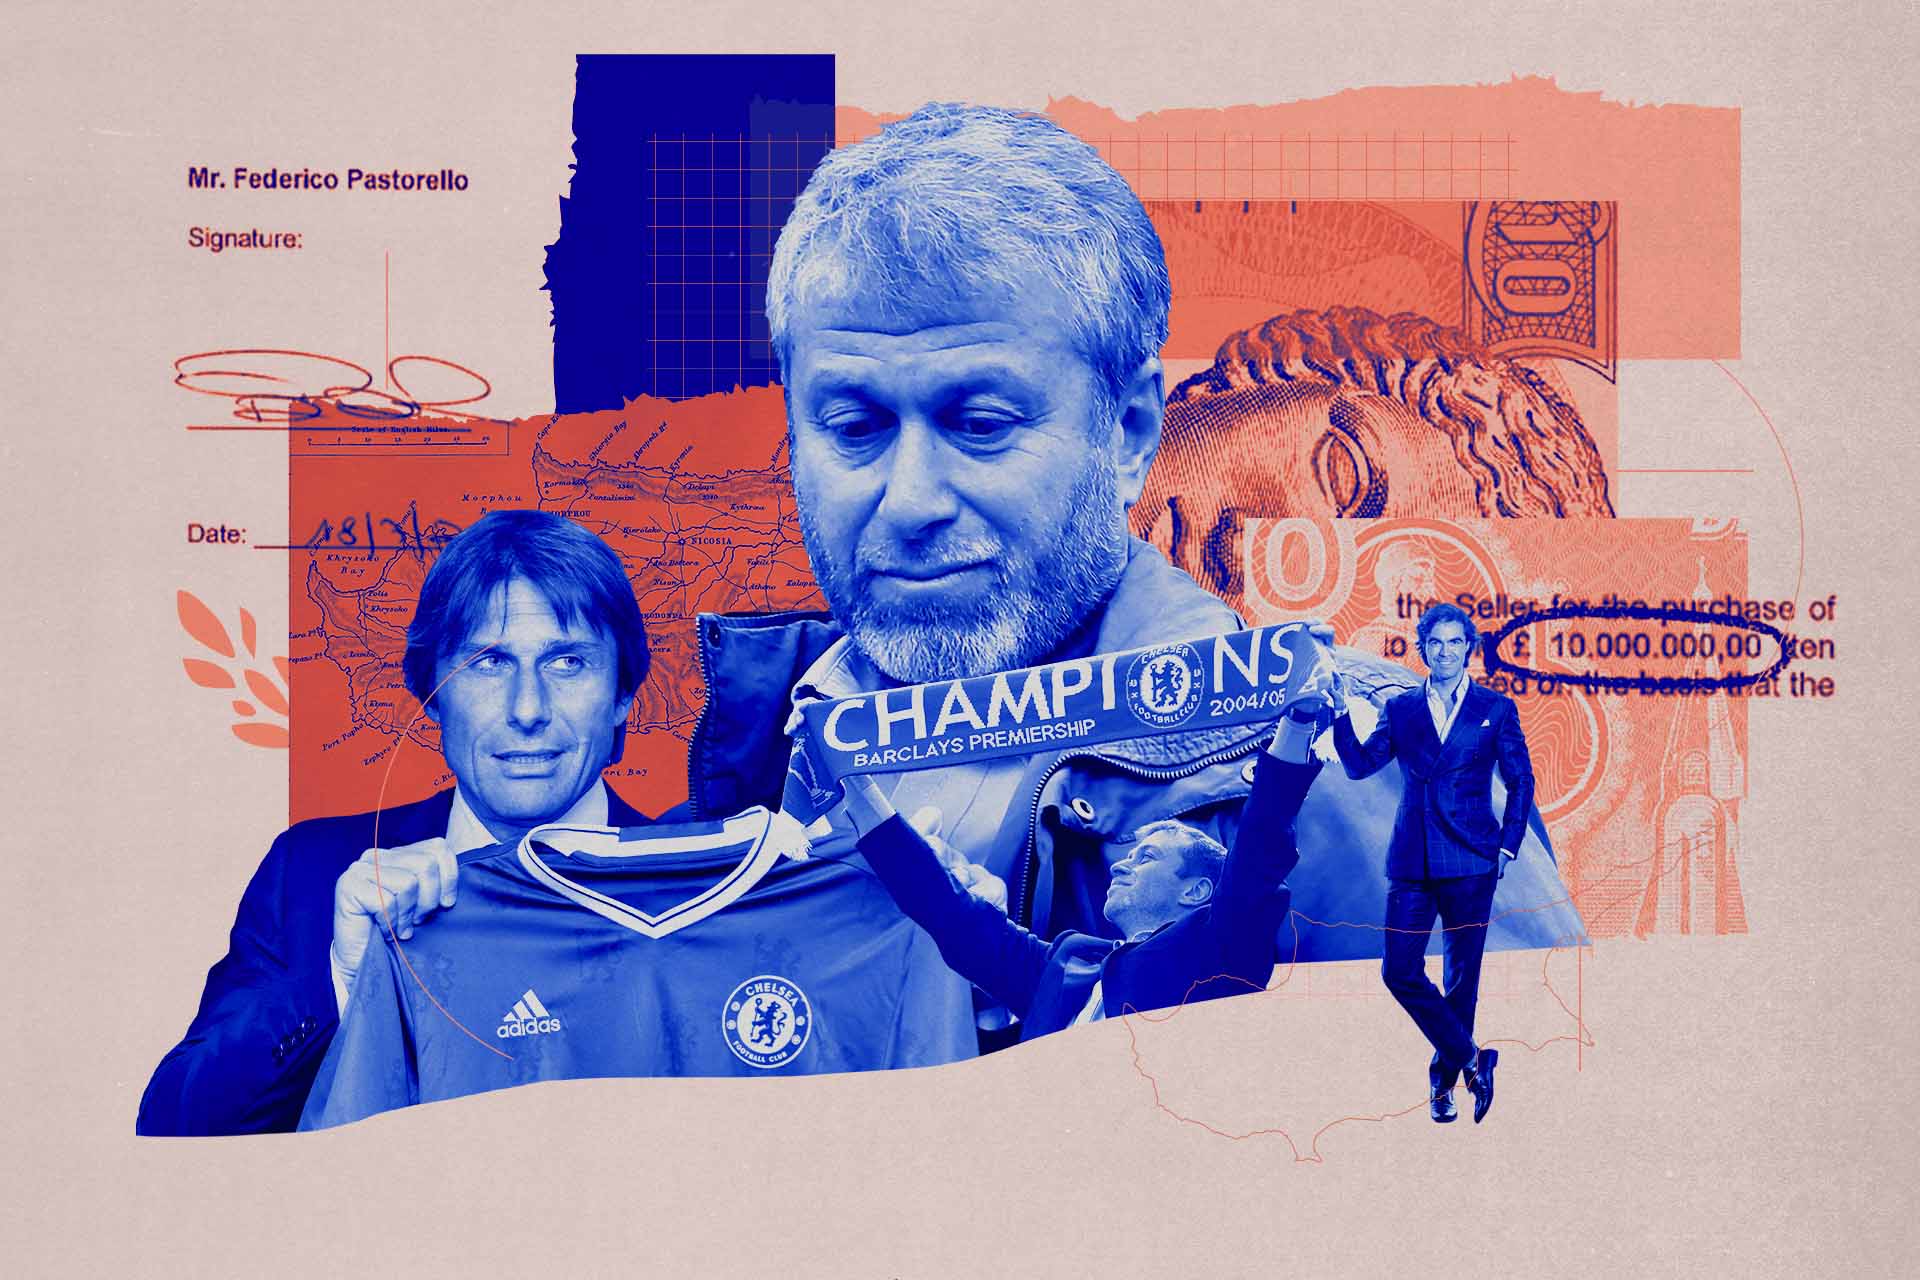  Abramovich’s Secret Football Payments May Have Breached Financial Fair Play Rules